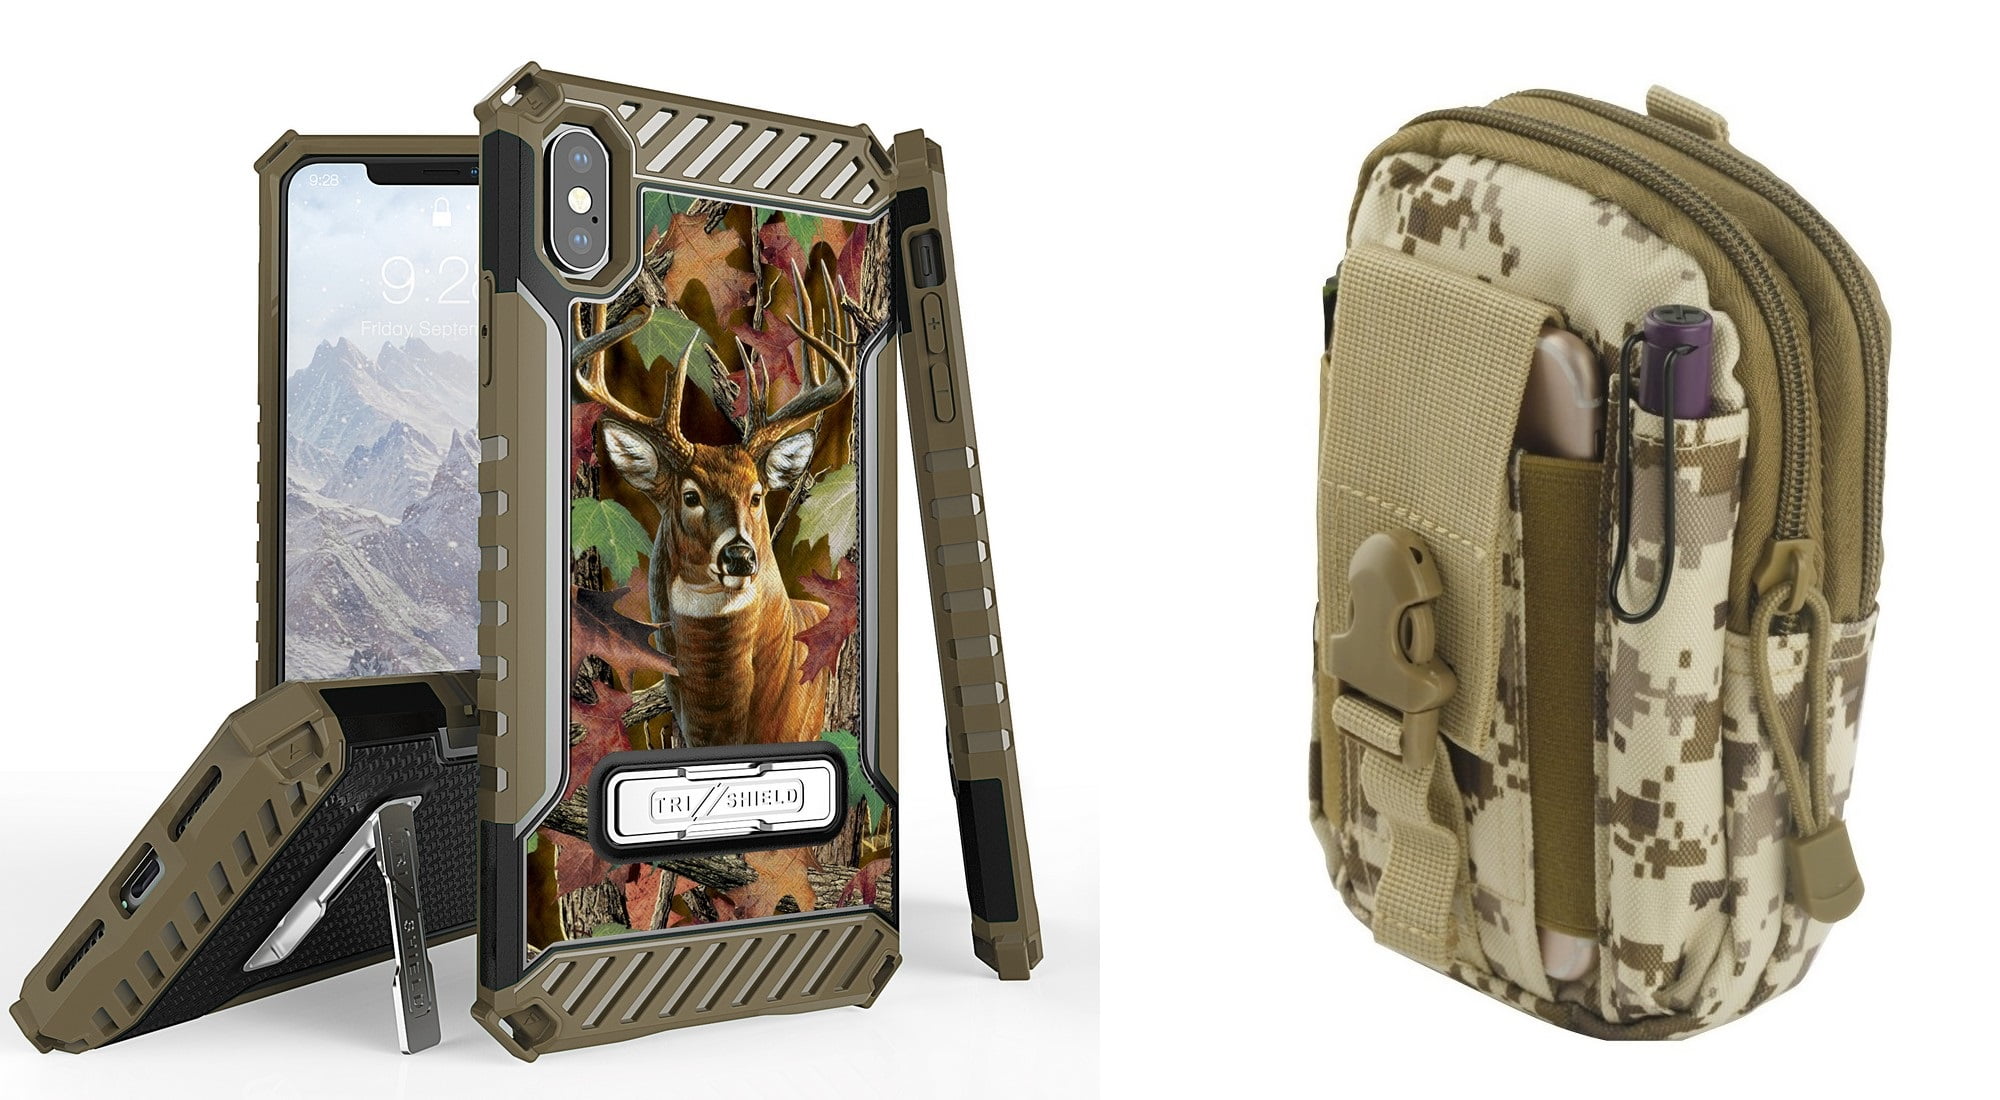 Beyond Cell Tri Shield Military Grade Shock Proof Kickstand Case (Camo Deer) with Desert Camo Tactical EDC MOLLE Belt Bag Pouch and Atom Cloth for iPhone Xs Max